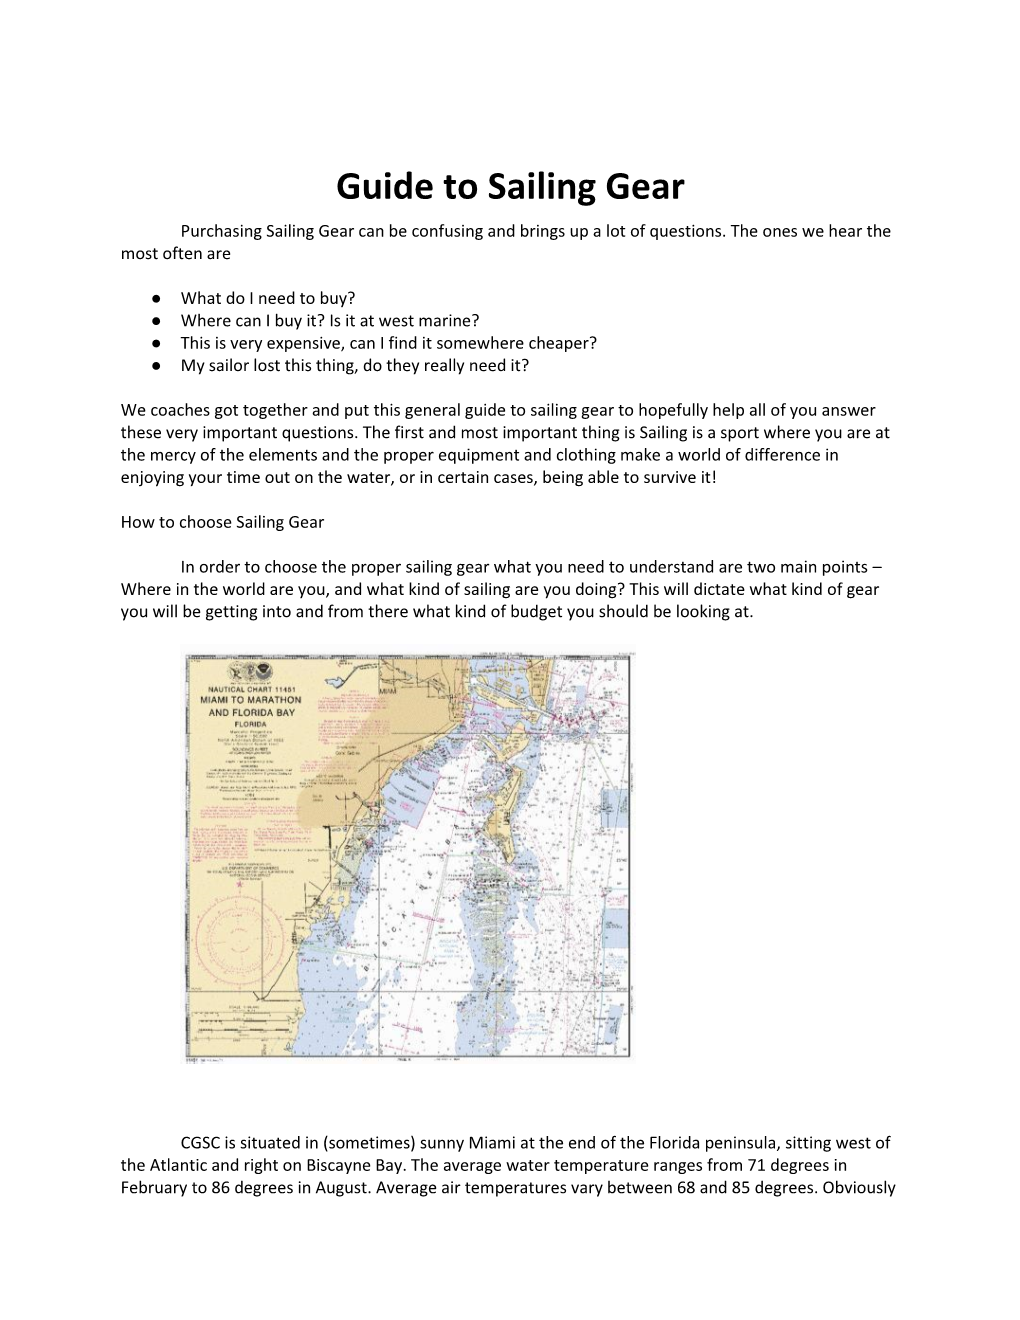 Guide to Sailing Gear Purchasing Sailing Gear Can Be Confusing and Brings up a Lot of Questions